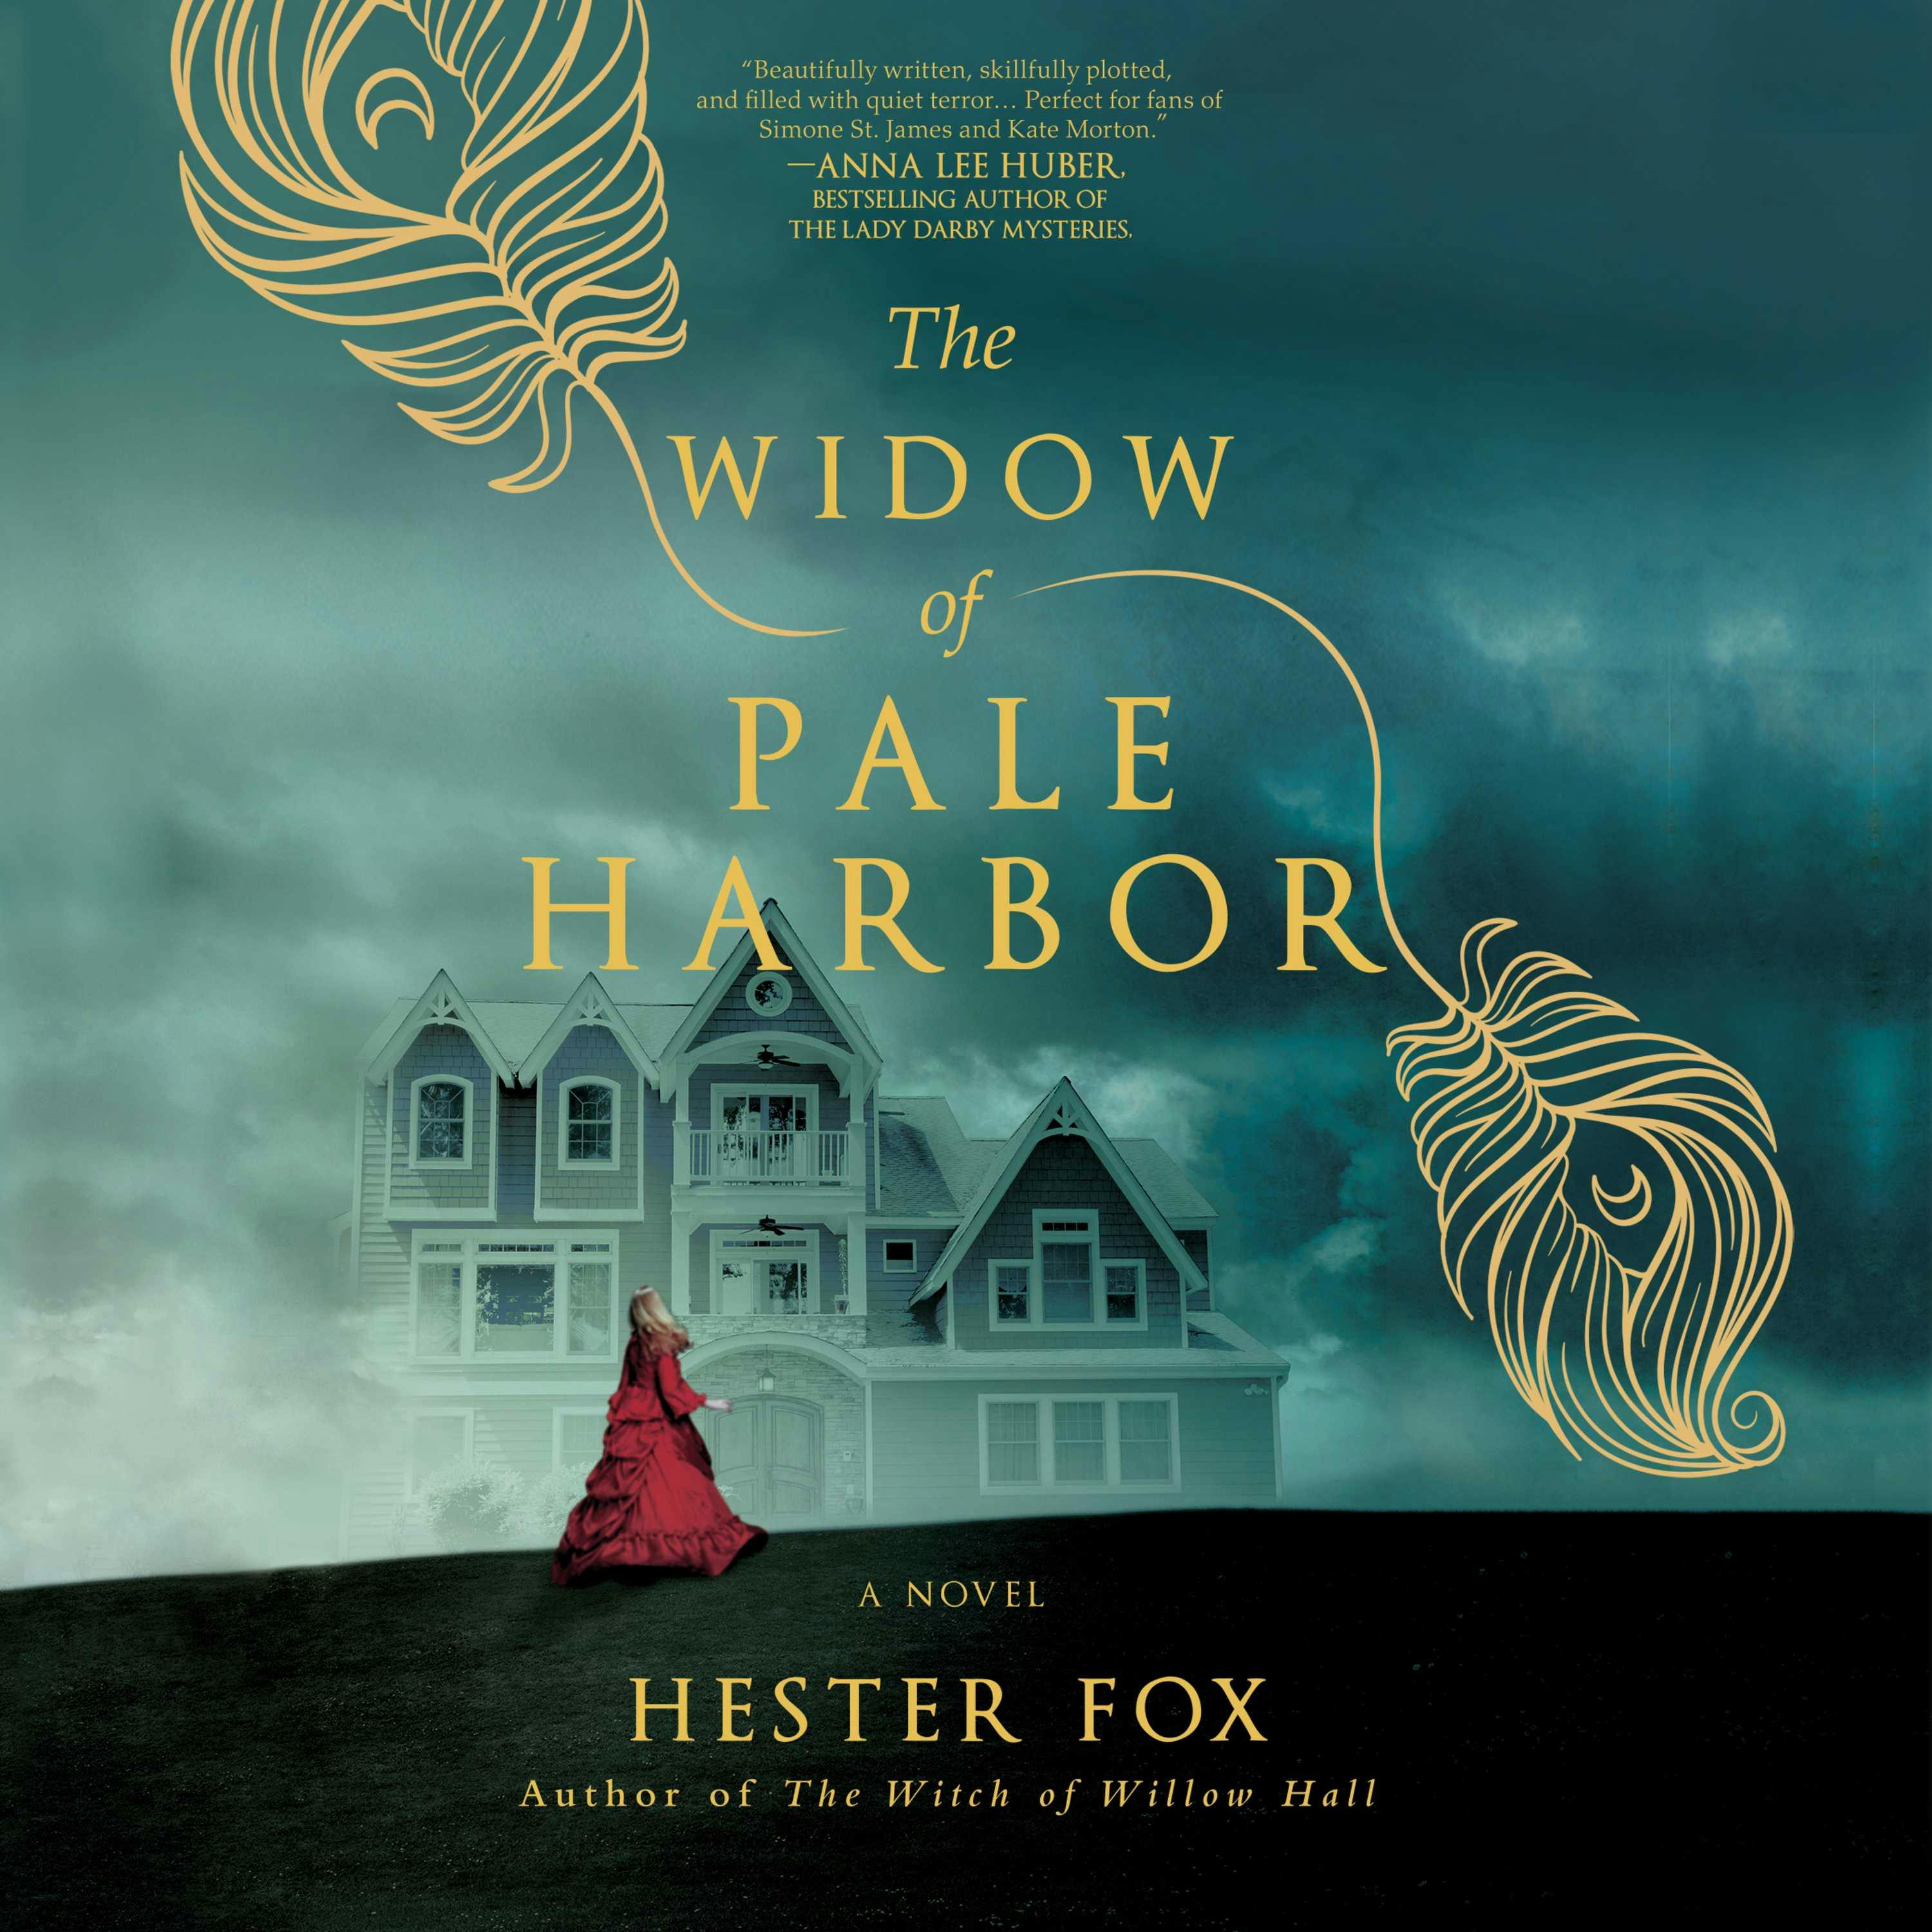 The Widow of Pale Harbor - Hester Fox